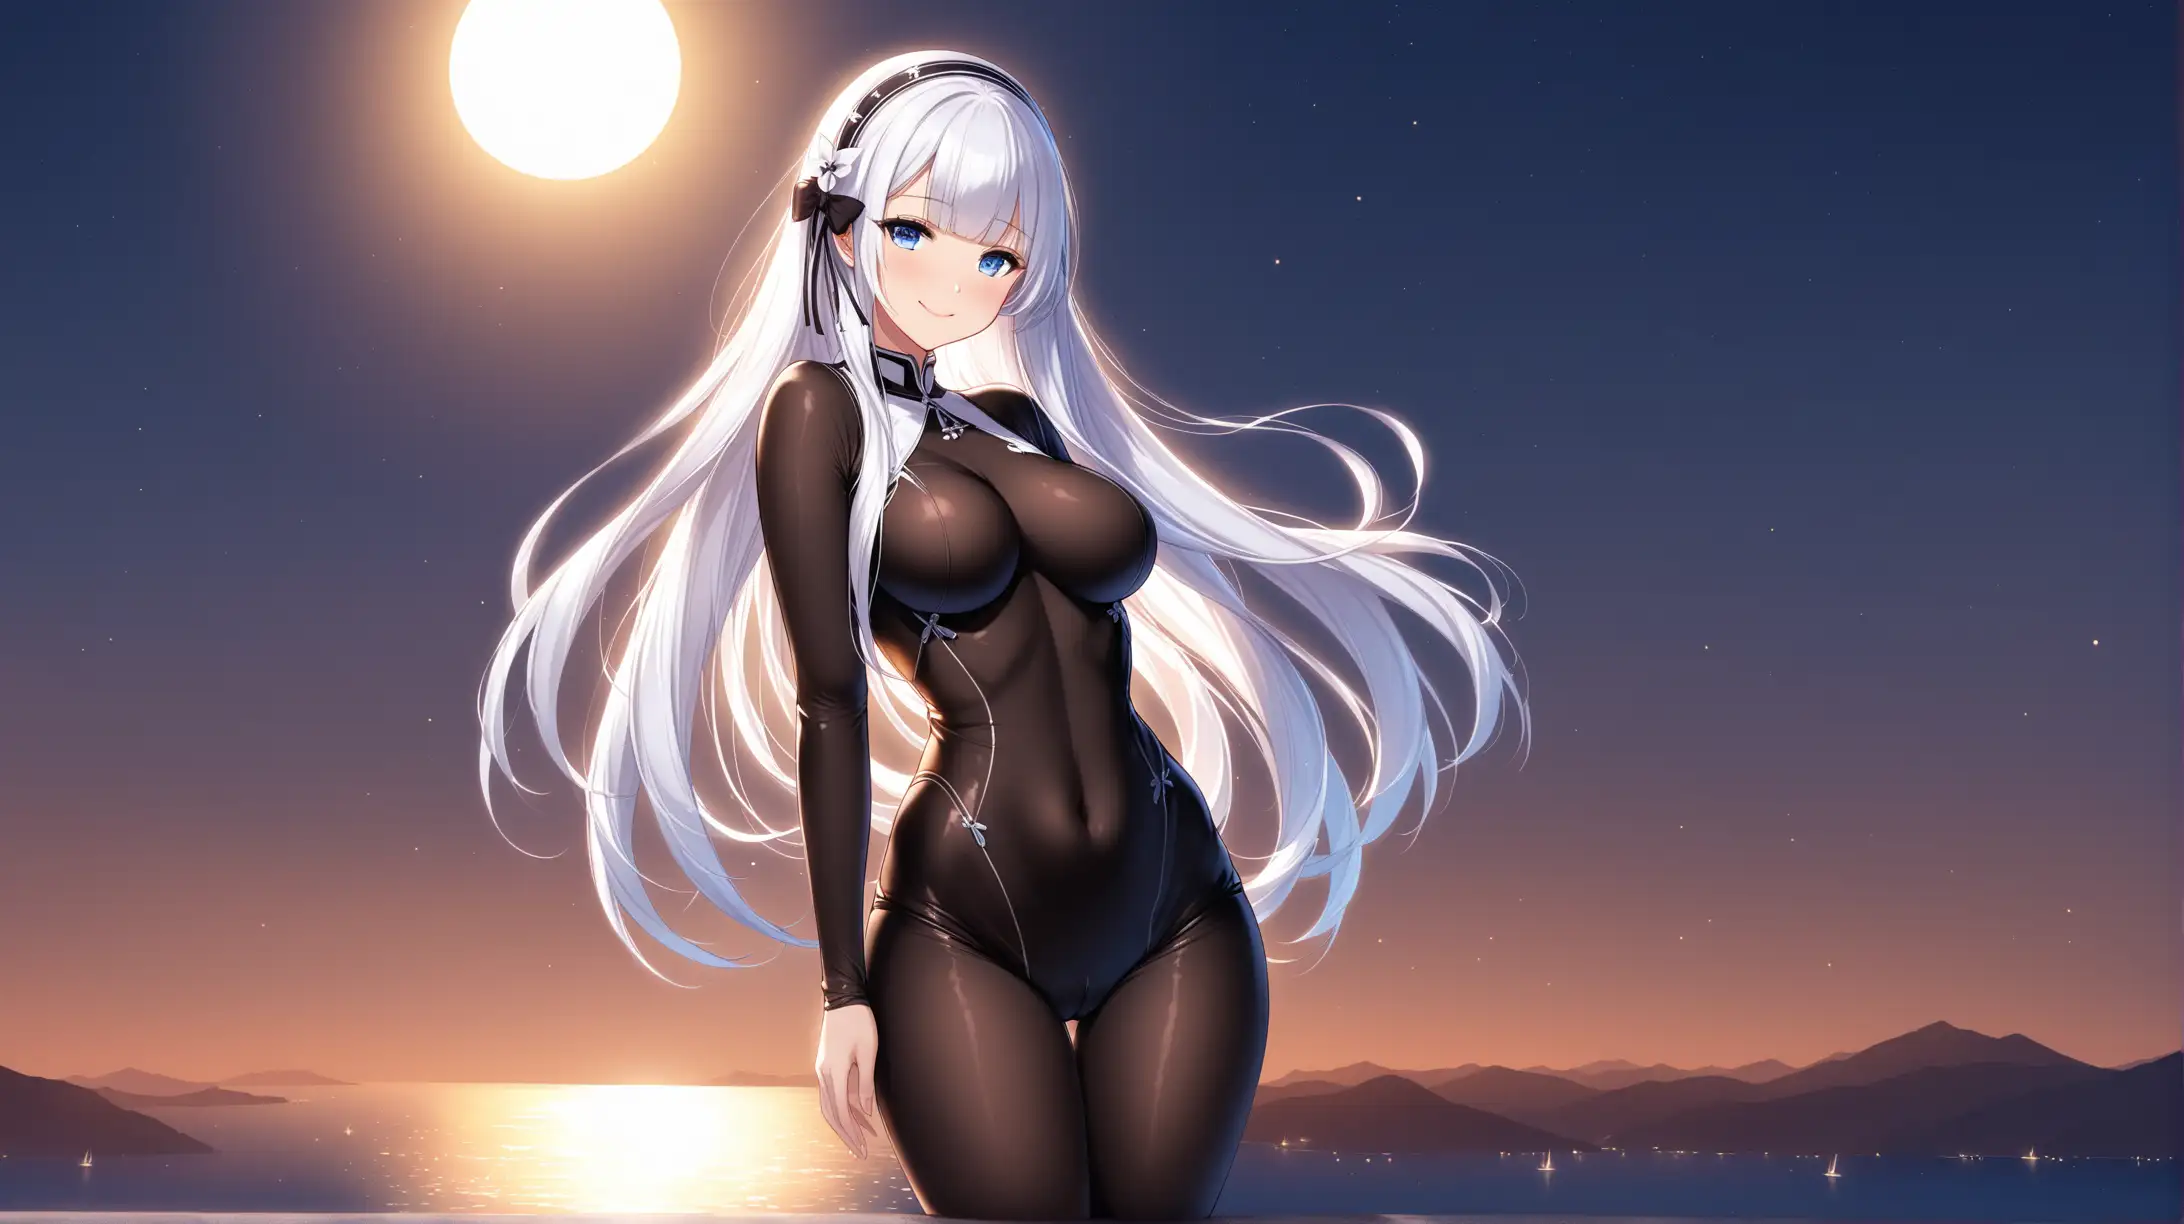 Draw the character Illustrious from Azur Lane, blue eyes, high quality, ambient lighting, long shot, outdoors, seductive pose, bodysuit with shorts, smiling at the viewer